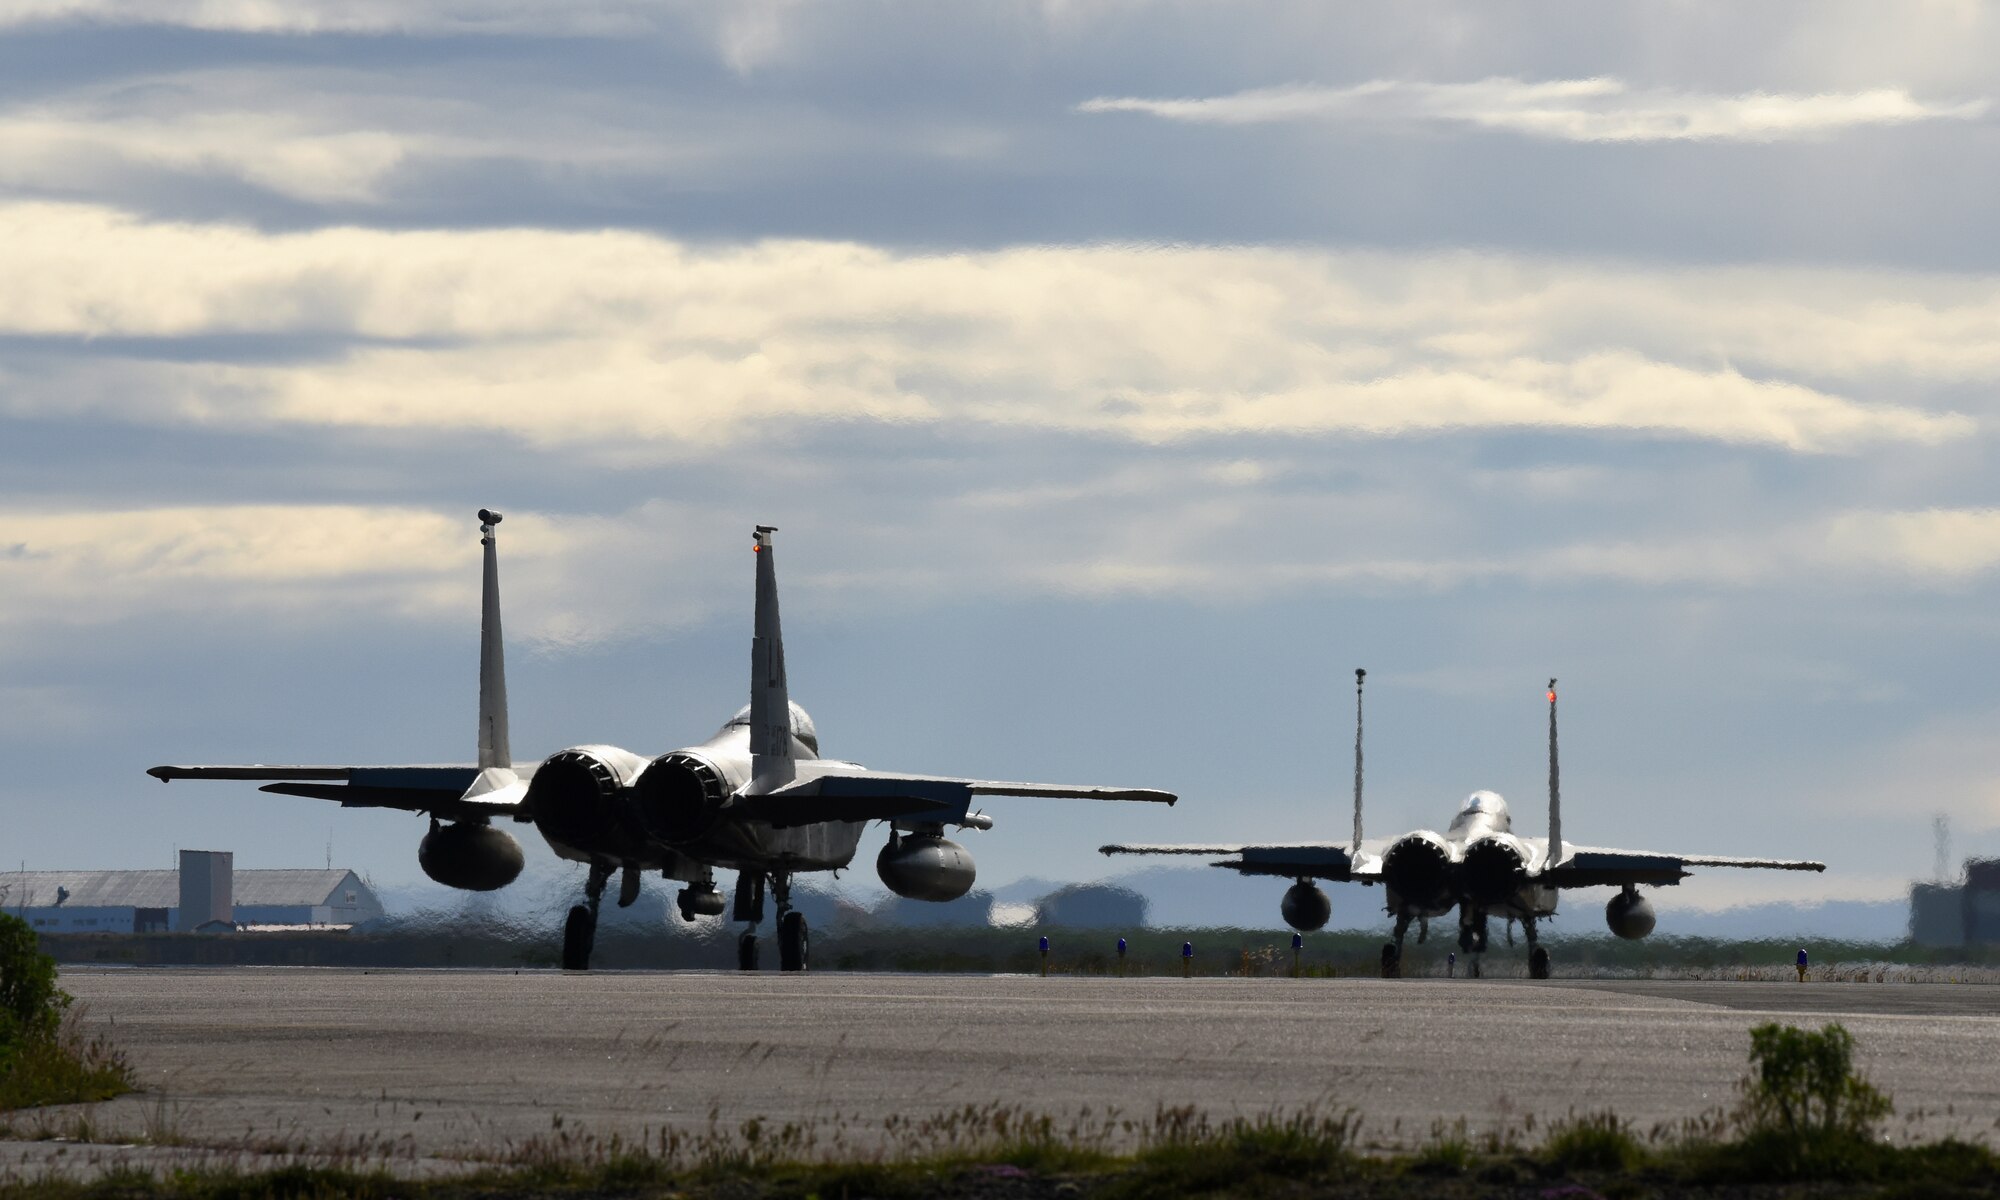 Two F-15C Eagles assigned to the 493rd Expeditionary Fighter Squadron taxi on the flightline at Keflavik Air Base, Iceland, Aug. 6, 2018, in support of NATO’s Icelandic Air Surveillance mission. While providing critical infrastructure and support, Iceland has looked to its NATO allies to provide airborne surveillance and interception capabilities to meet its peacetime preparedness needs since 2008. (U.S. Air Force photo/Staff Sgt. Alex Fox Echols III)